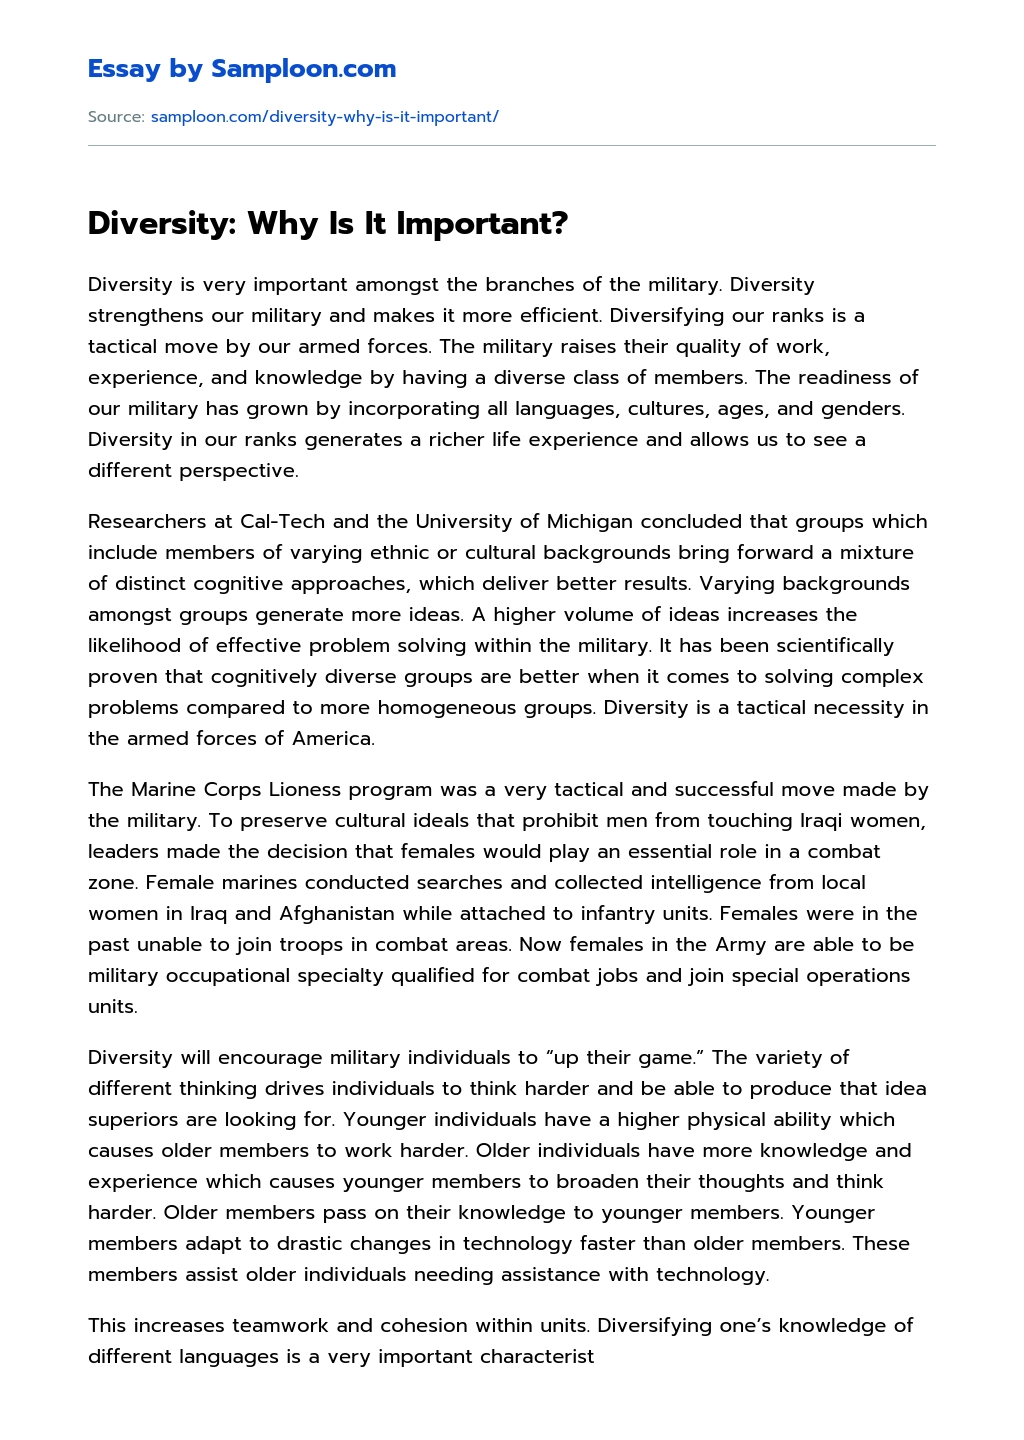 Diversity: Why Is It Important? essay